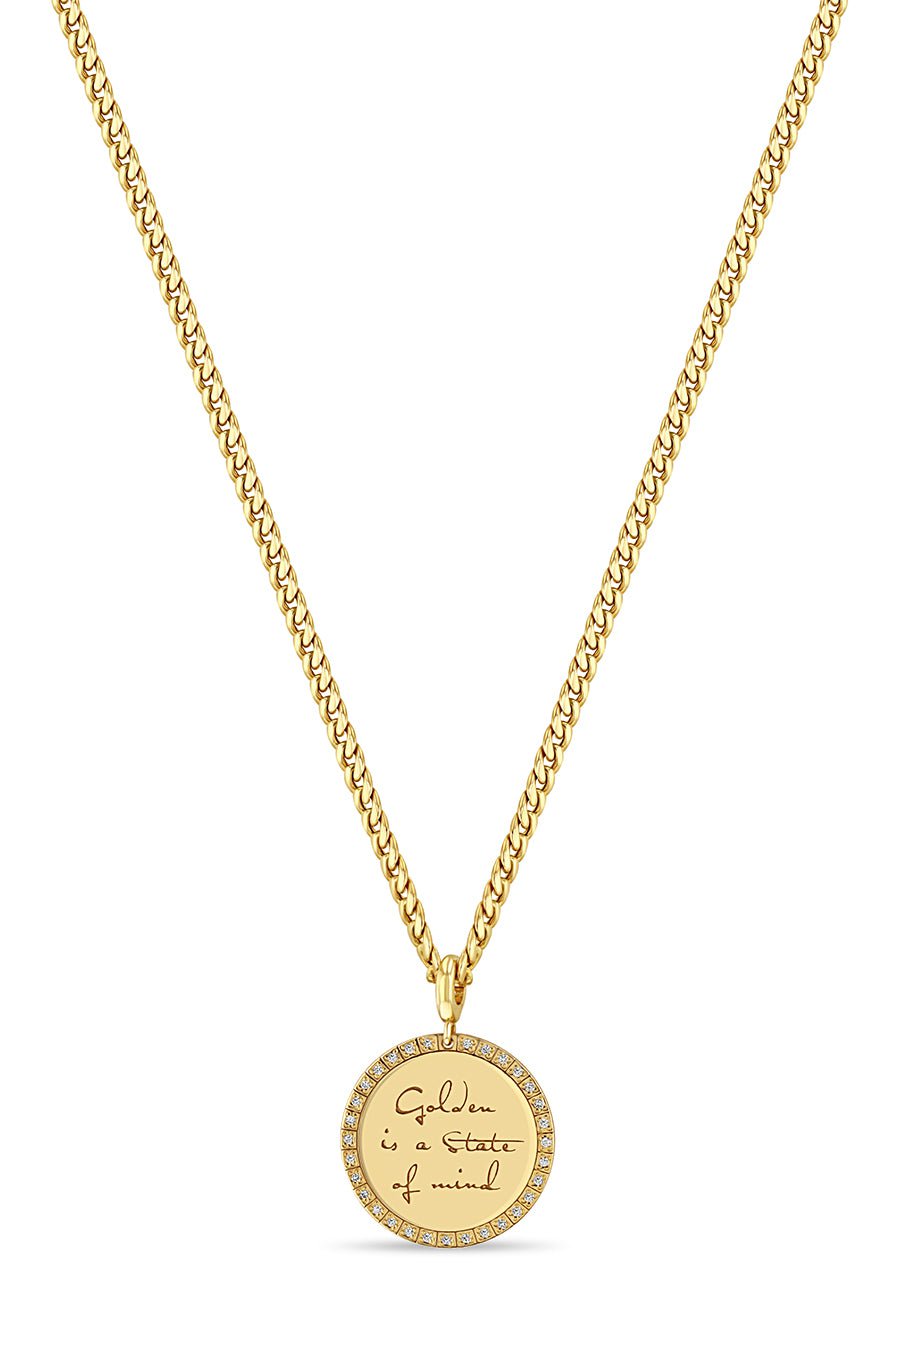 ZOE CHICCO-Golden Is A State Of Mind Necklace-YELLOW GOLD